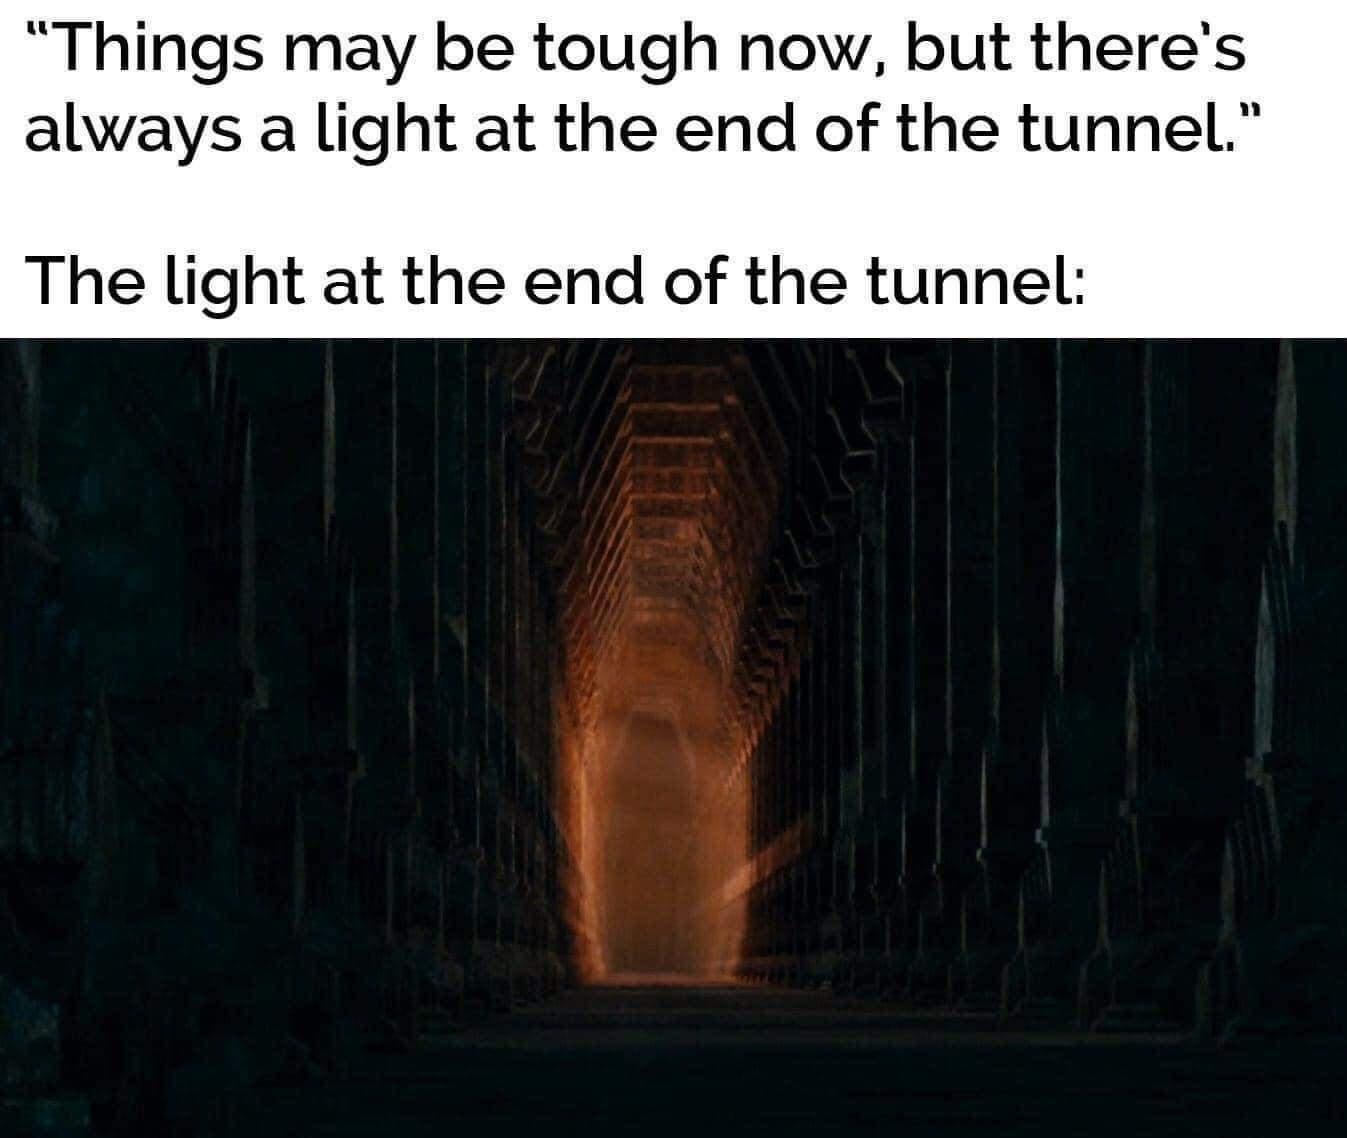 funny memes - dank memes - tunnel in the hobbit - Things may be tough now, but there's always a light at the end of the tunnel." The light at the end of the tunnel